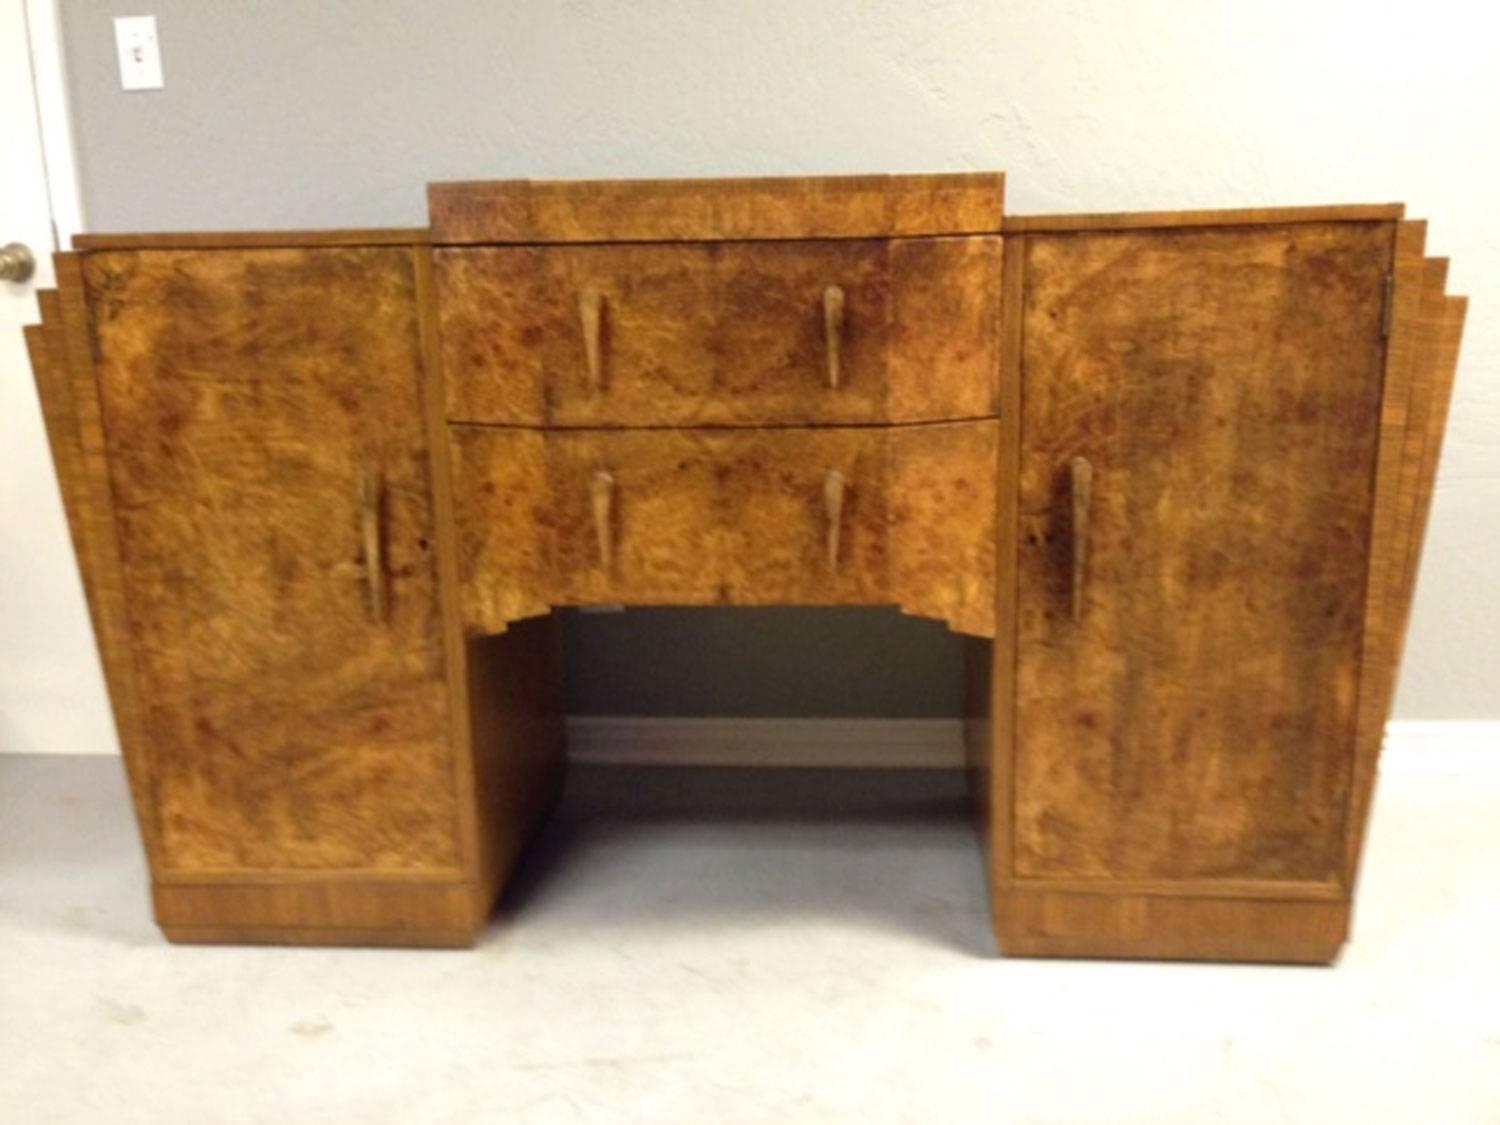 Rare Marcel Guillemard French Art Deco dining room buffet or bar. Note the bookmatch amboyna wood from the padauk tree now famous for its use on Rolls Royce and Mercedes automobile dashboards. The burl wood nature of the grain of this wood lends